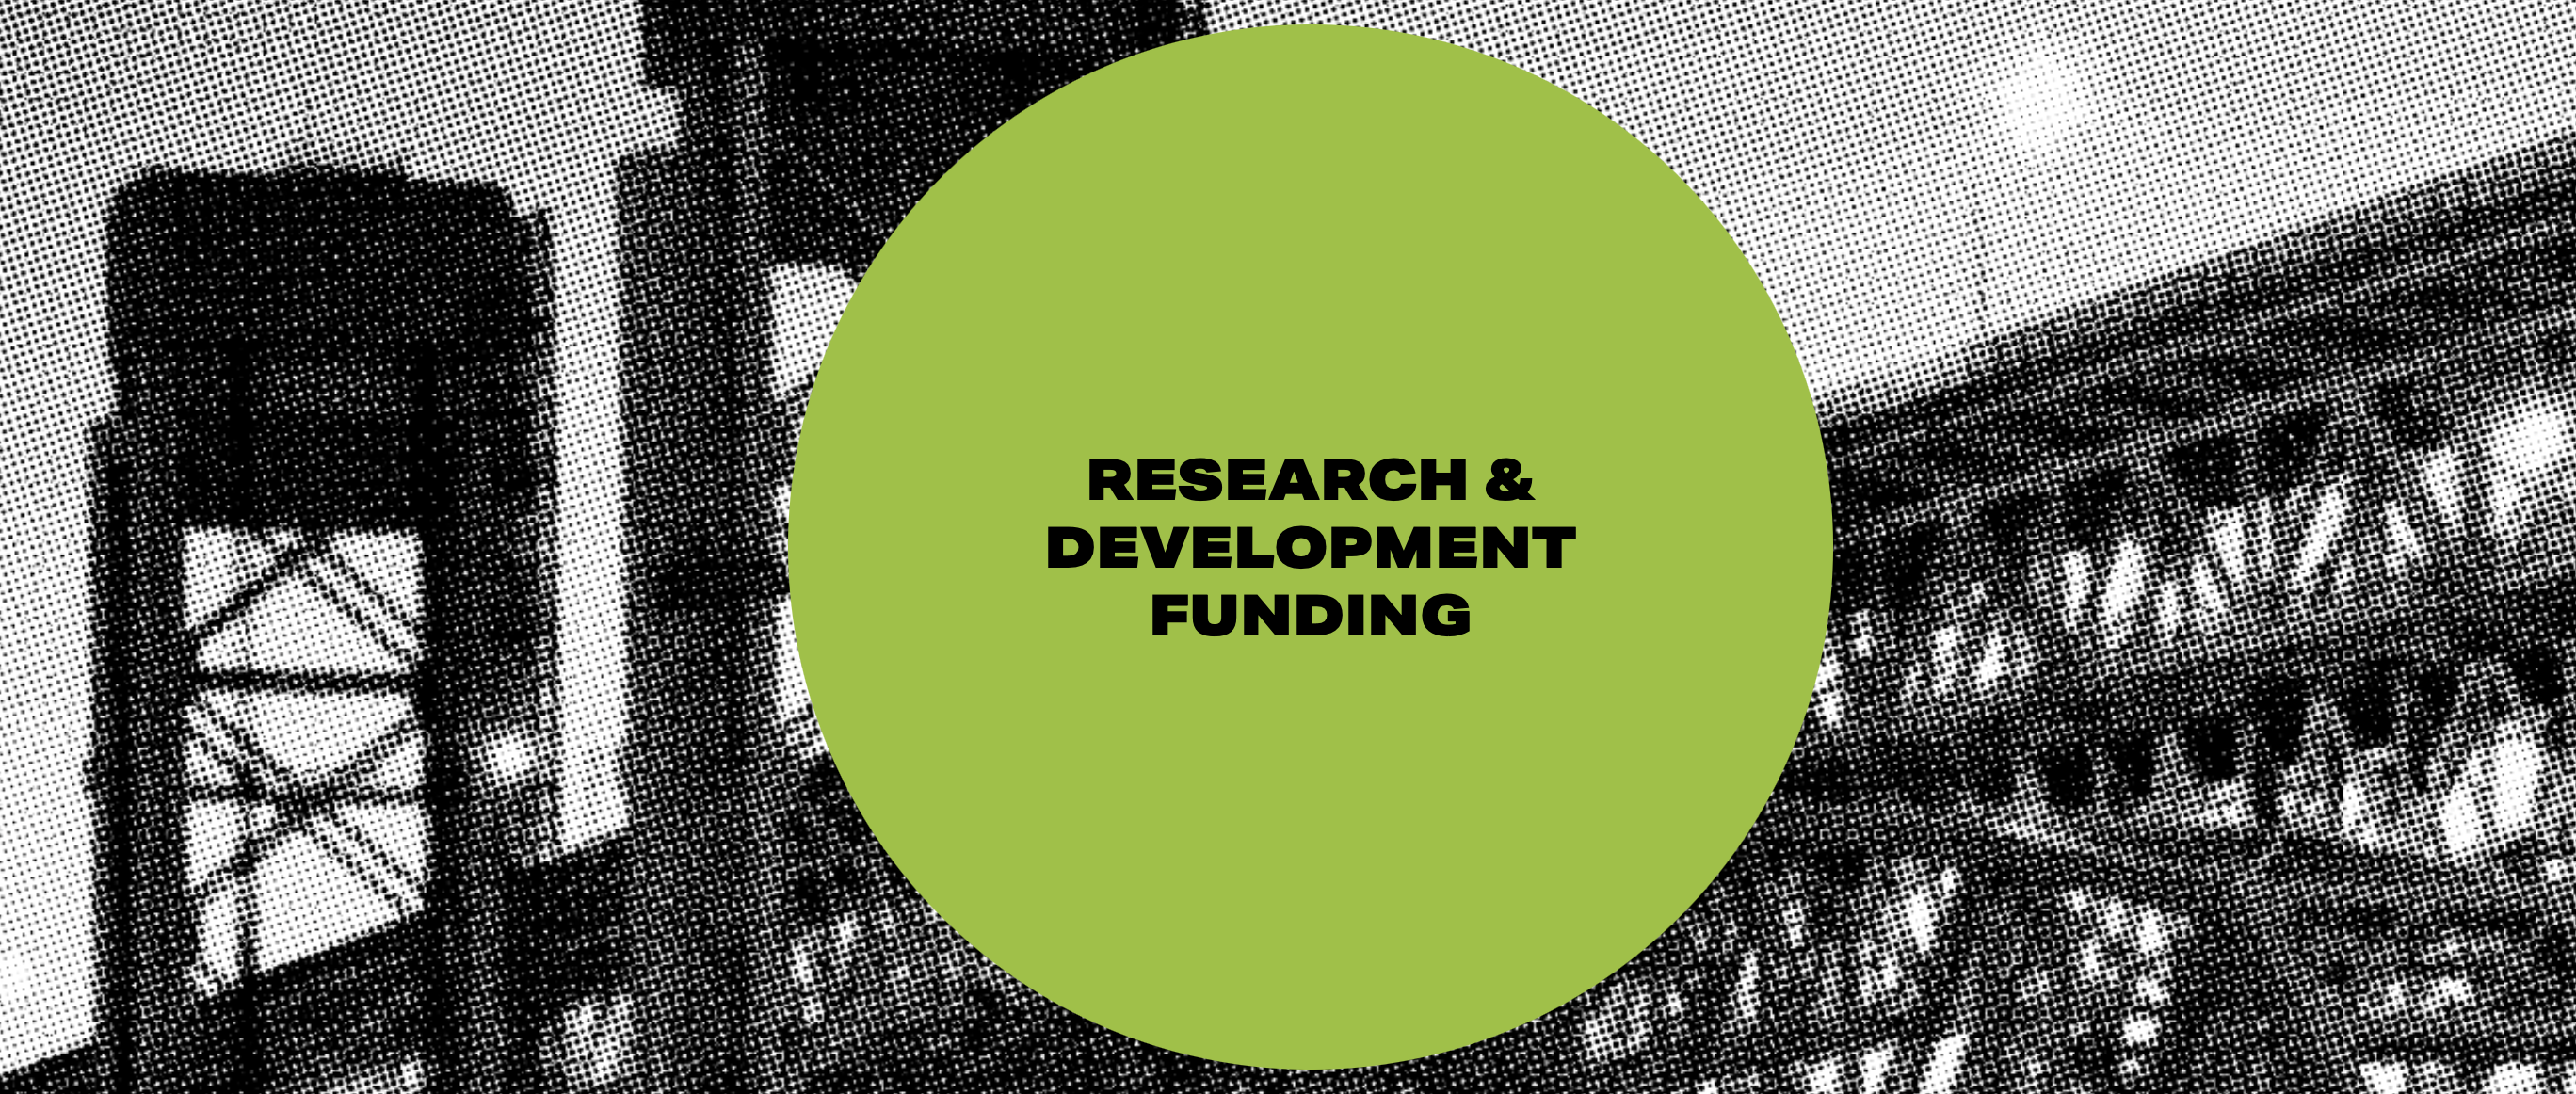 Research and development funding banner